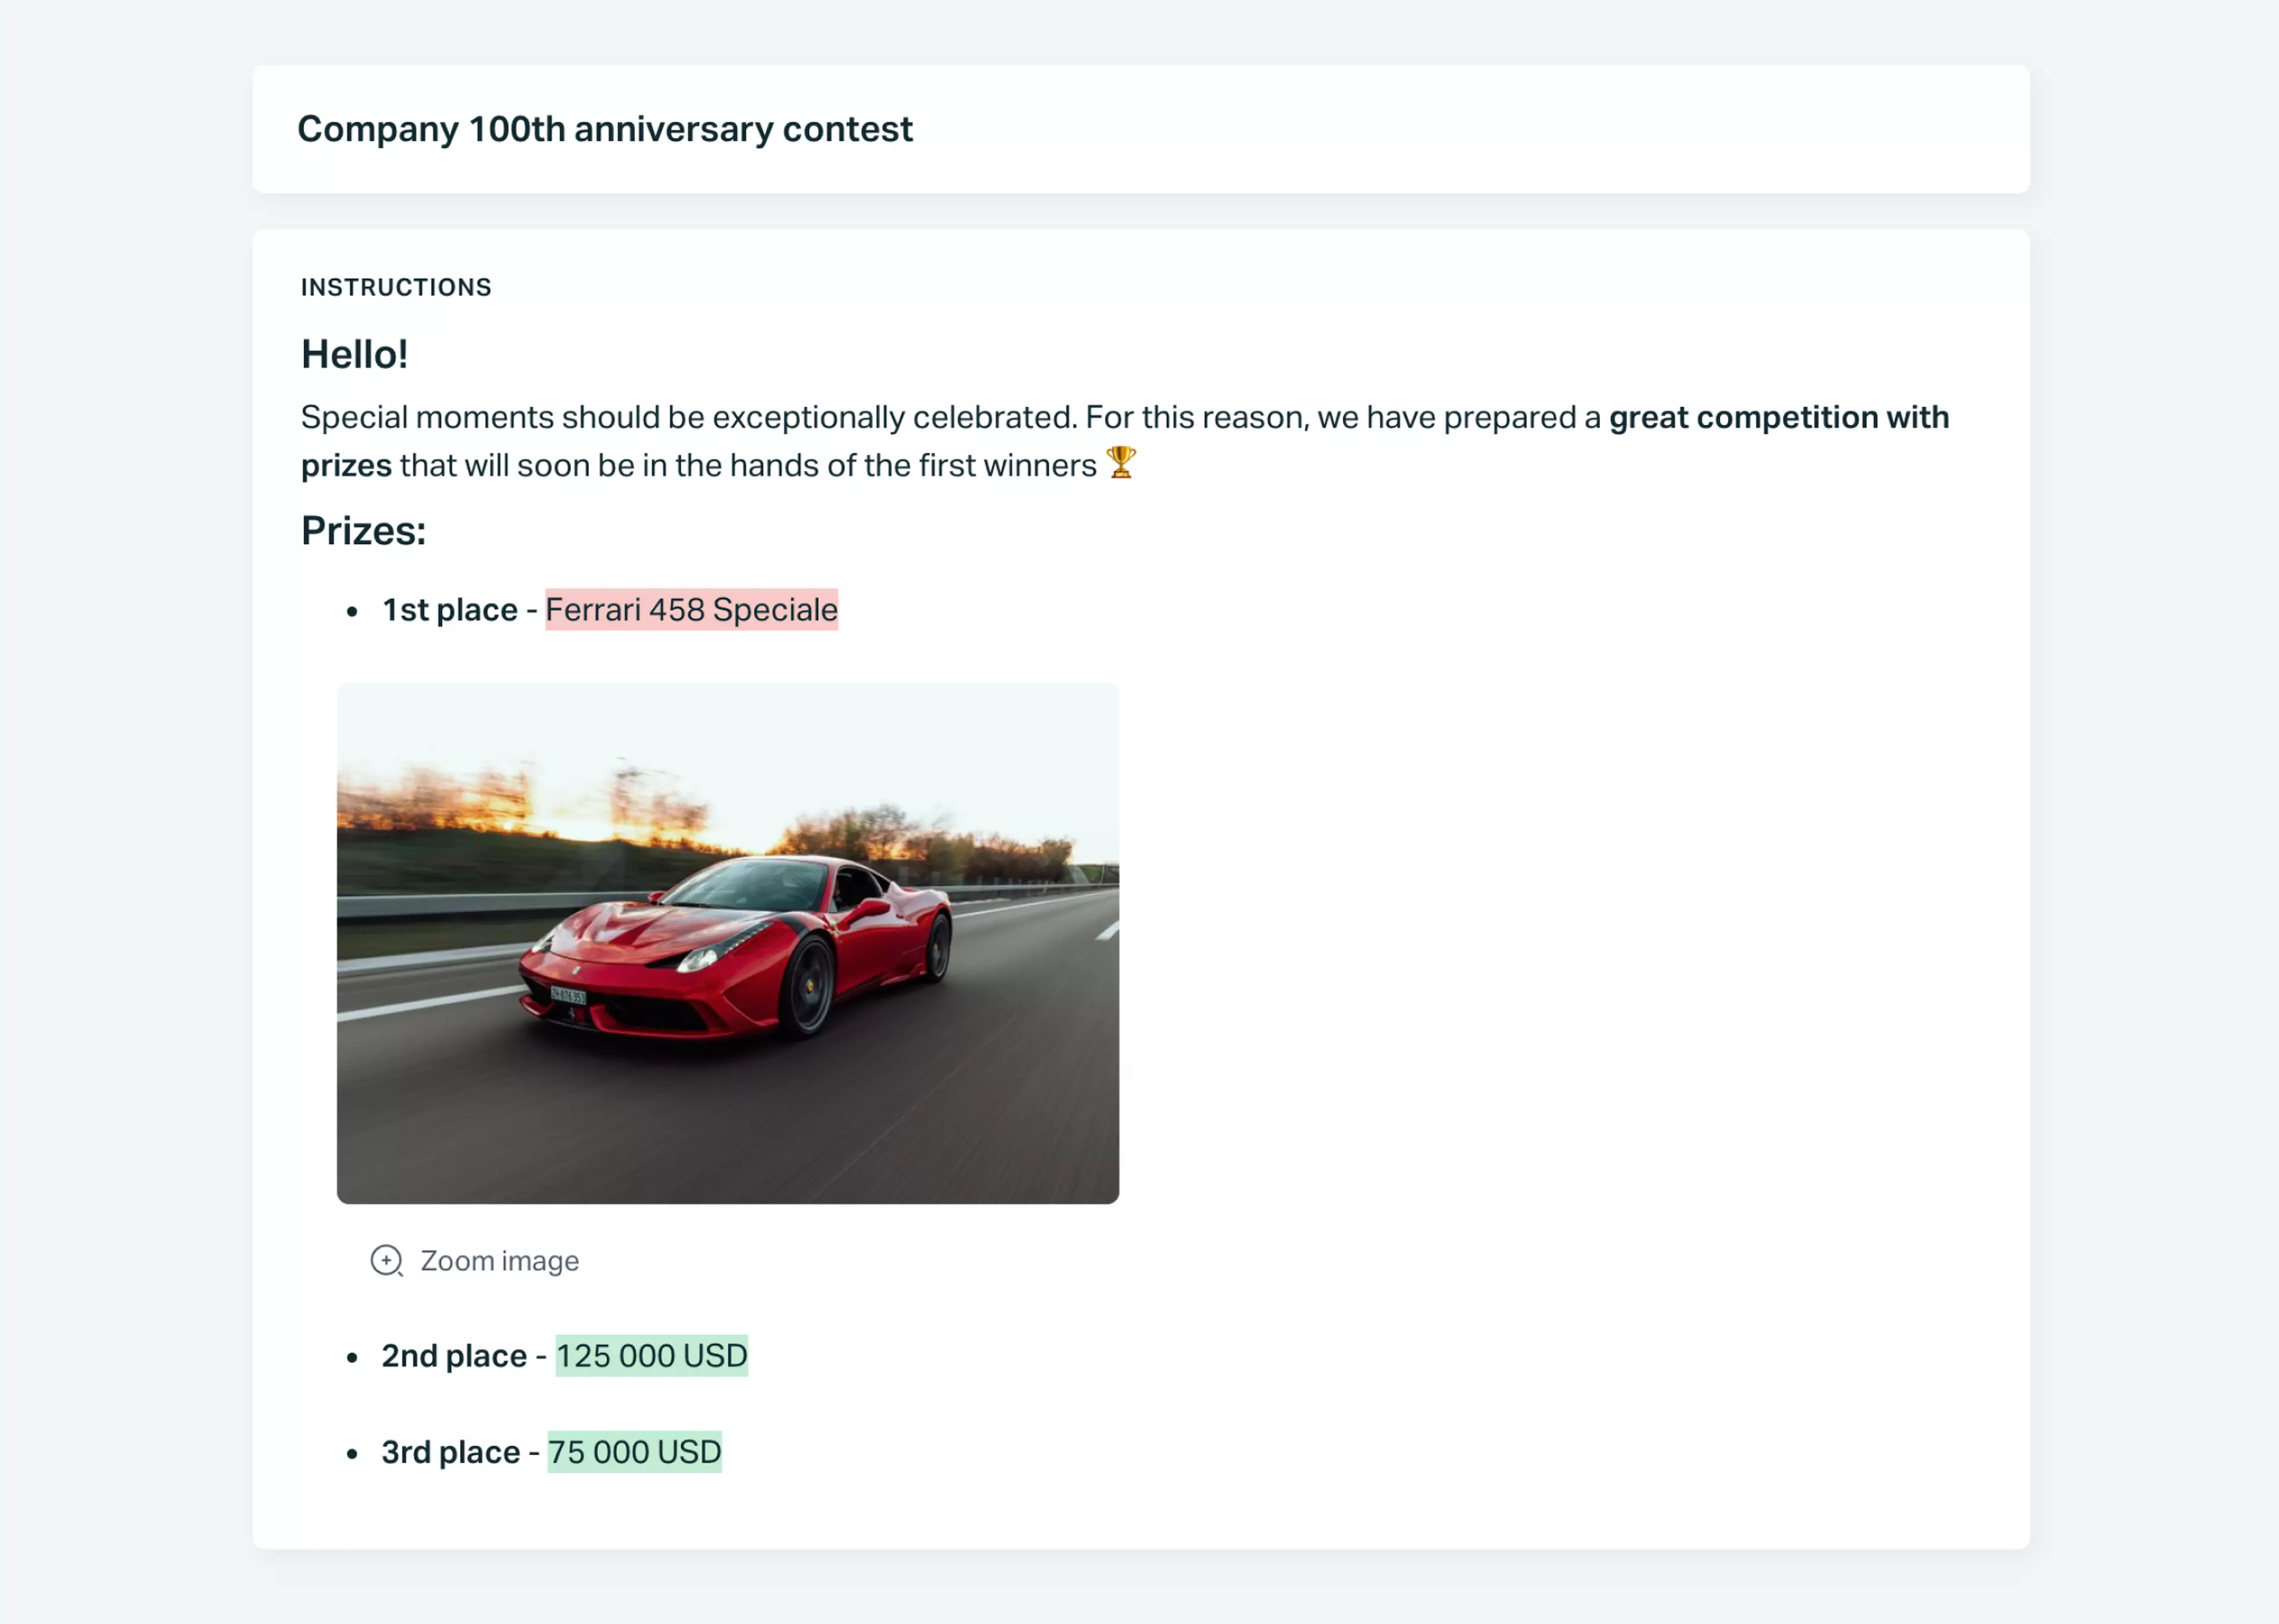   Testportal online quiz start page with an image of a car.